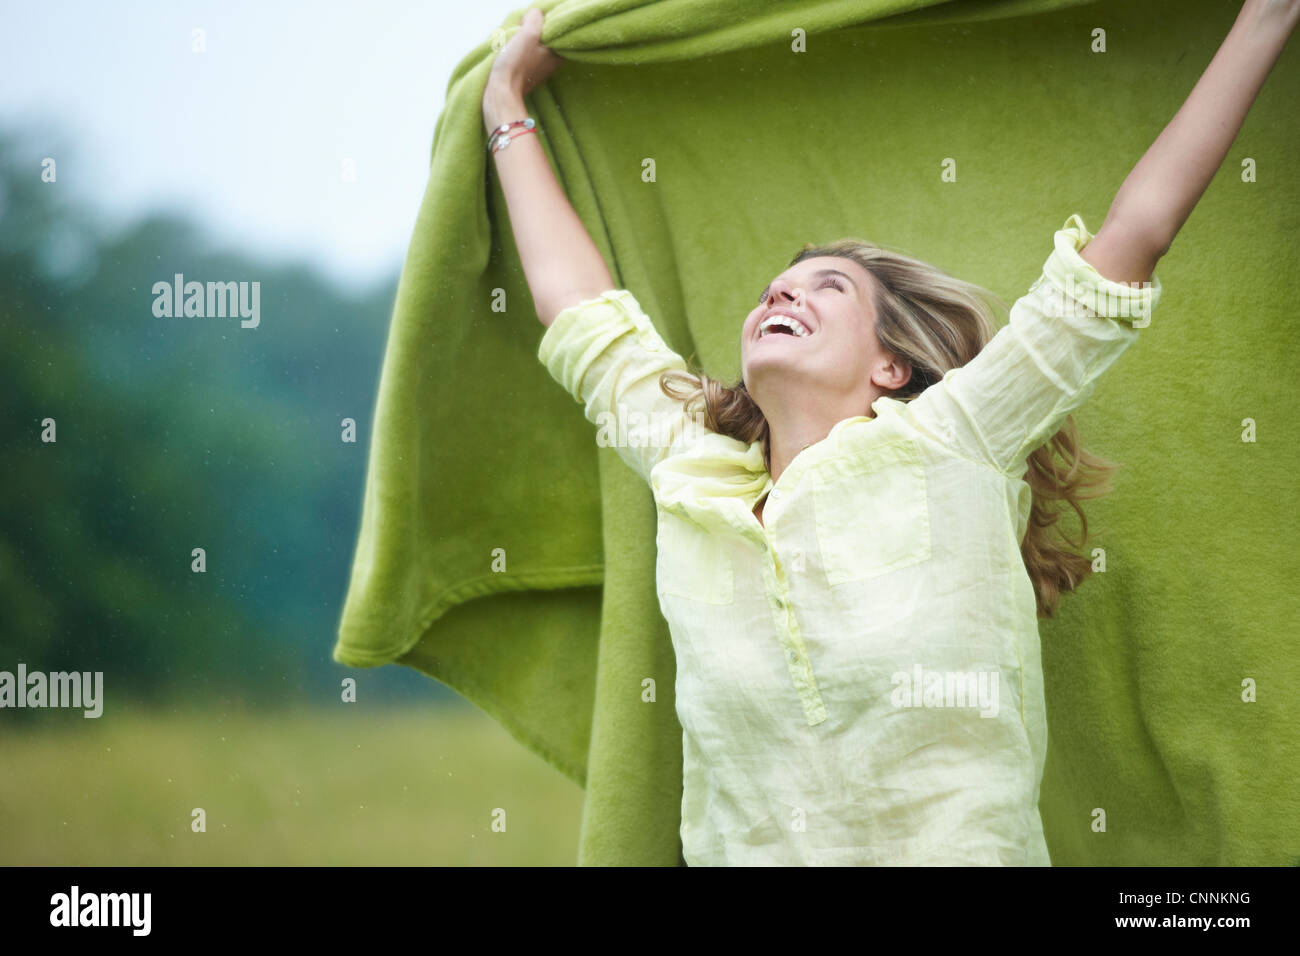 Woman holding blanket outdoors Banque D'Images